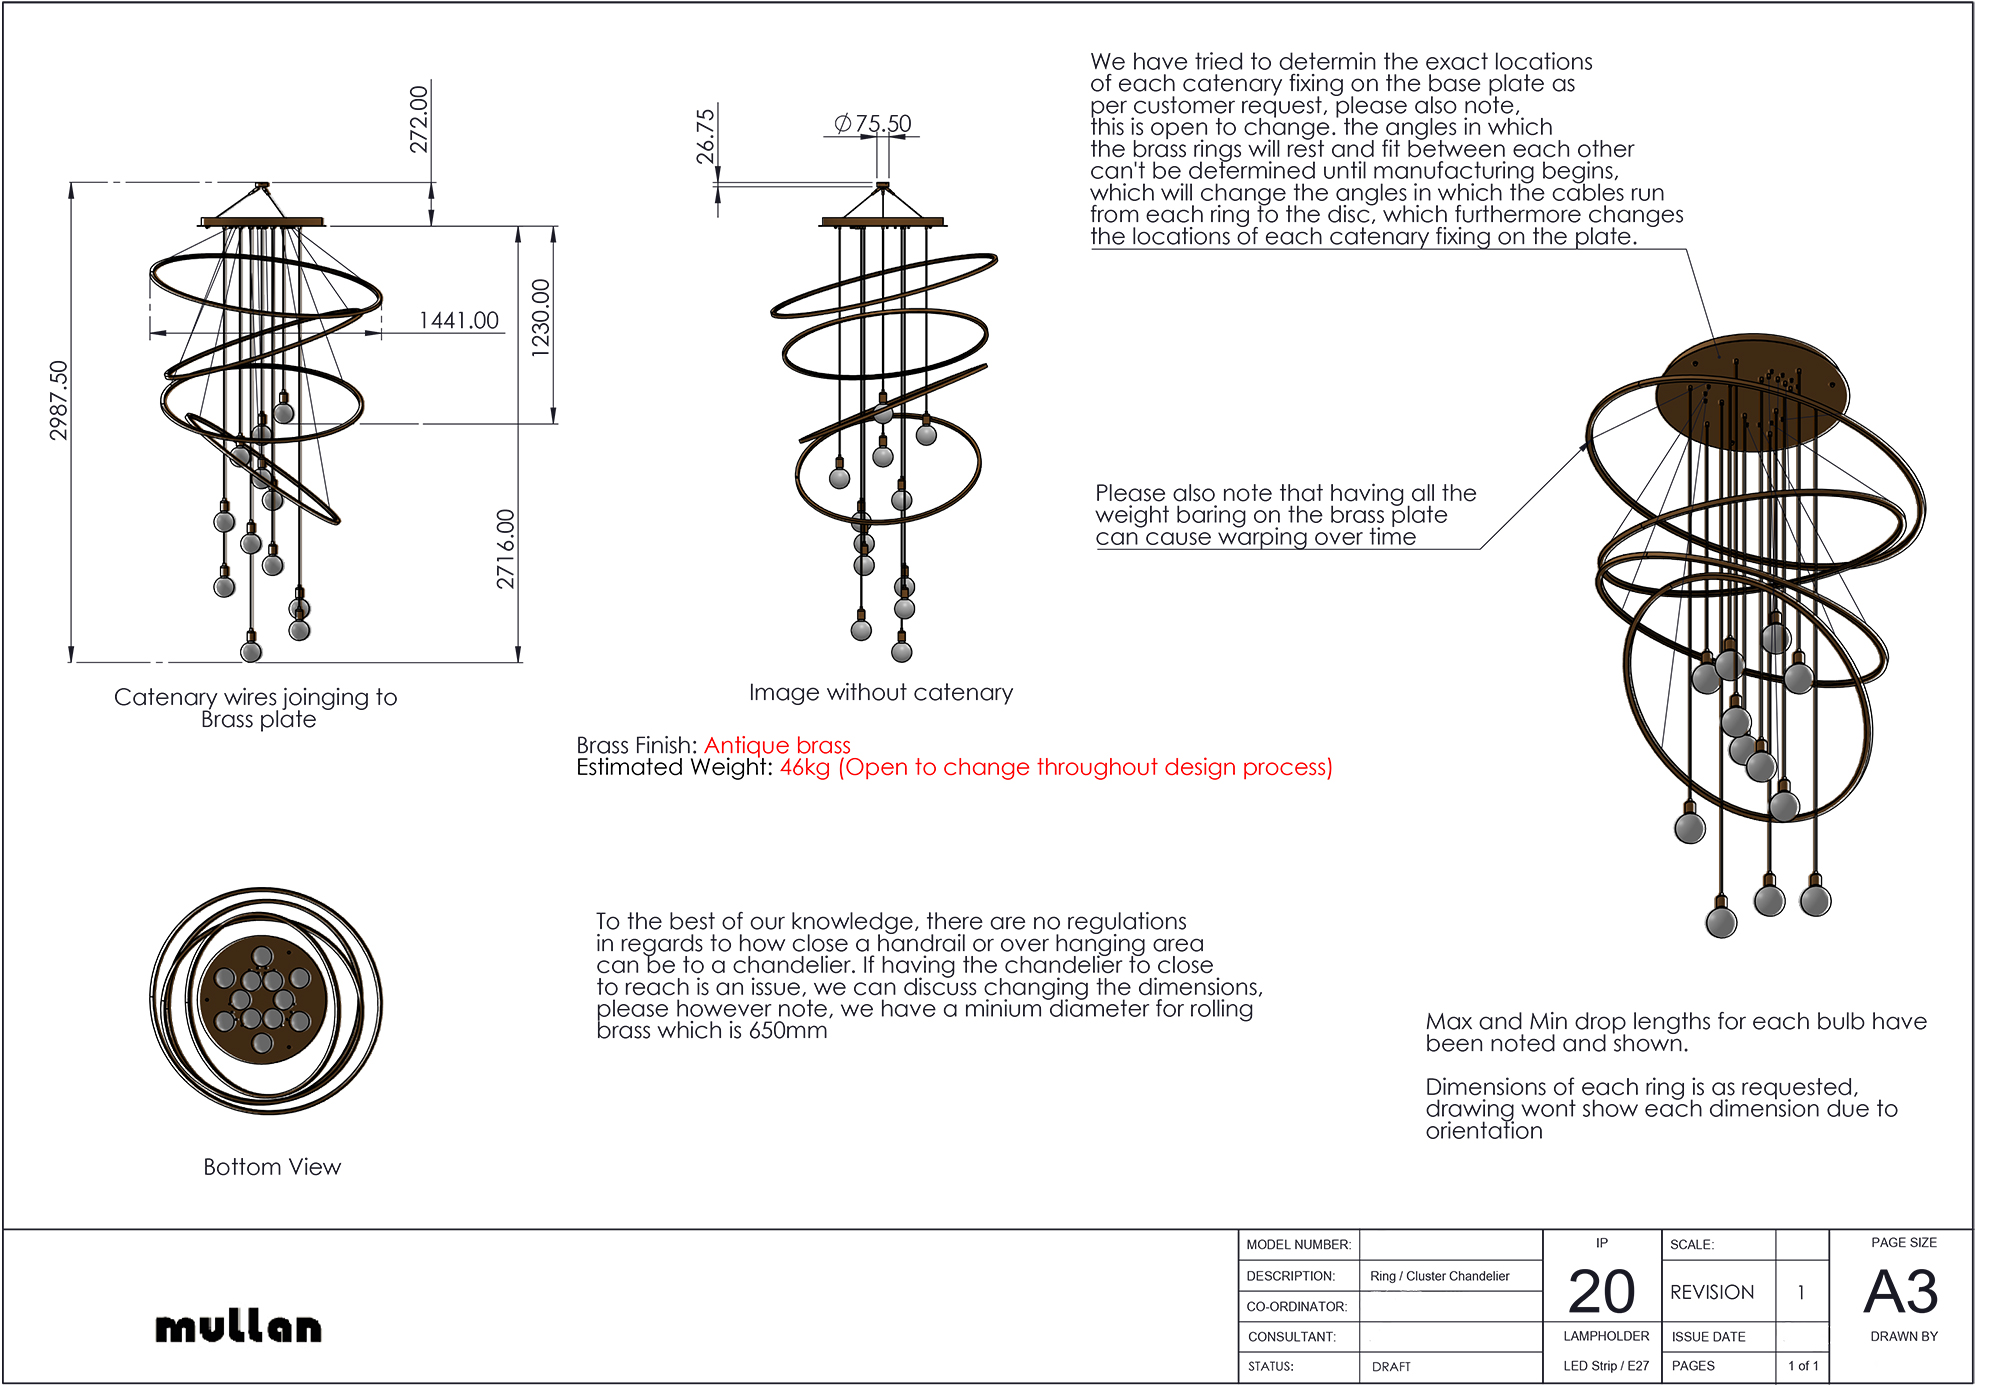 The technical drawing of the chandelier with the fittings all in the middle.